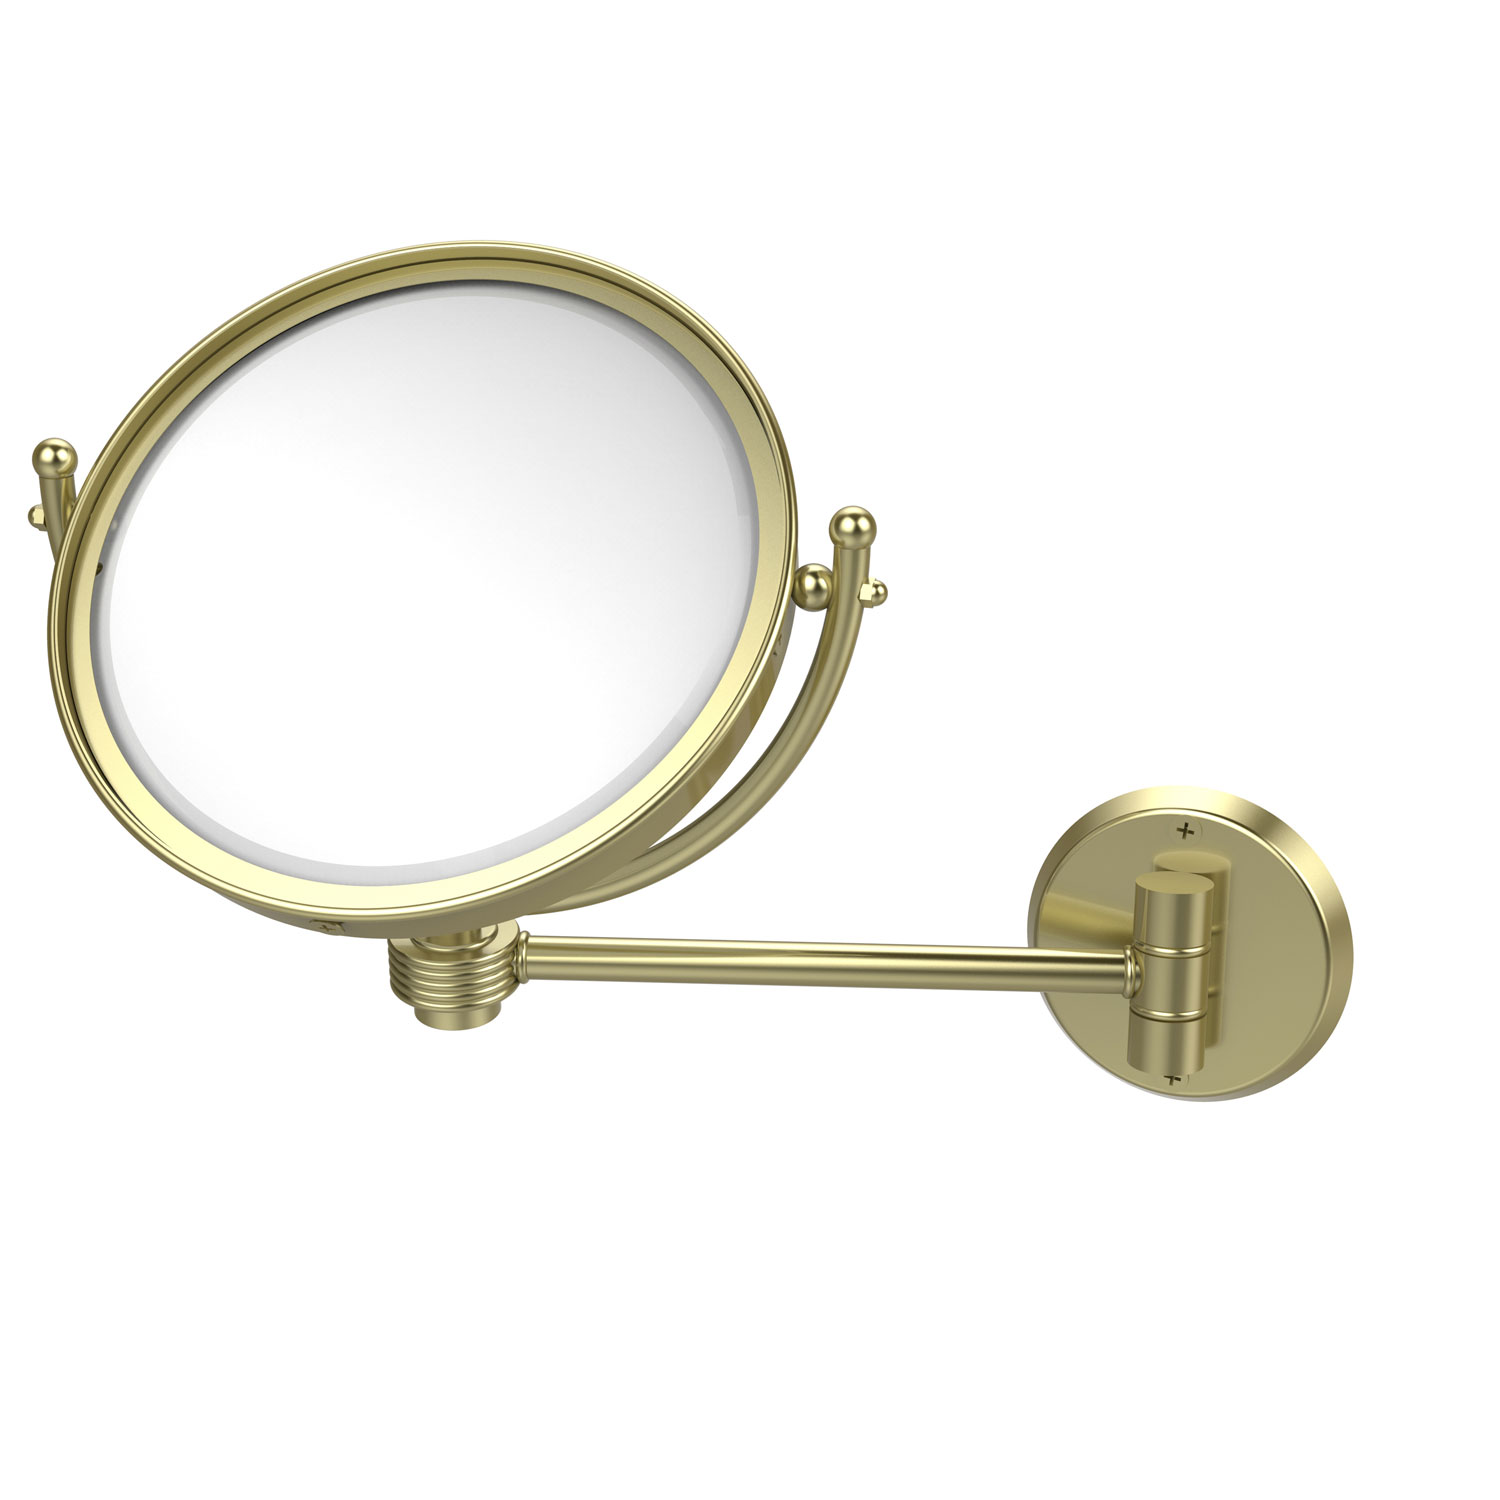 8 Inch Wall Mounted Make-Up Mirror 5X Magnification, Satin Brass